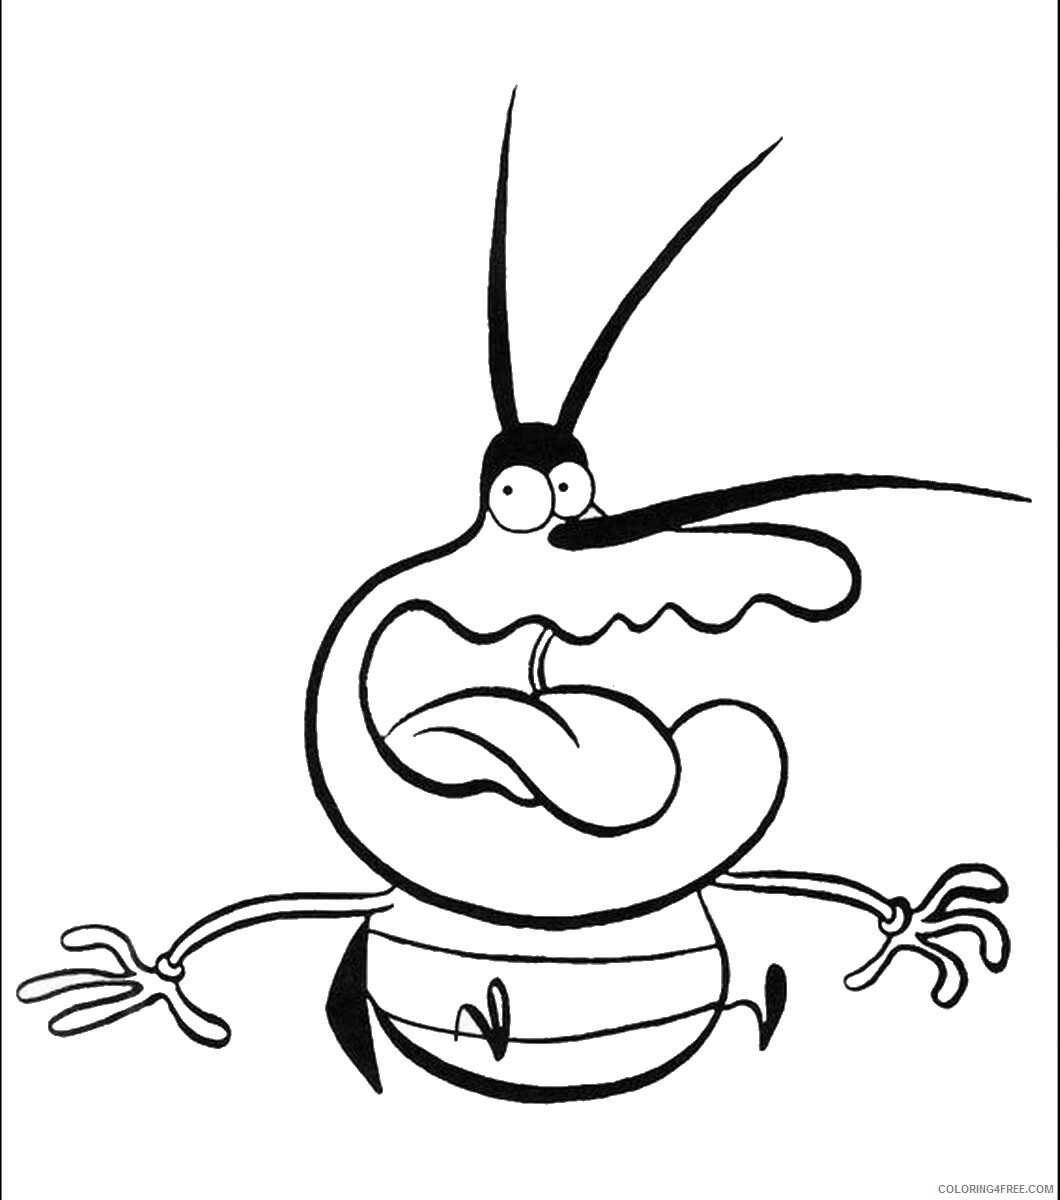 Oggy and the Cockroaches Coloring Pages TV Film Printable 2020 05605 Colori...